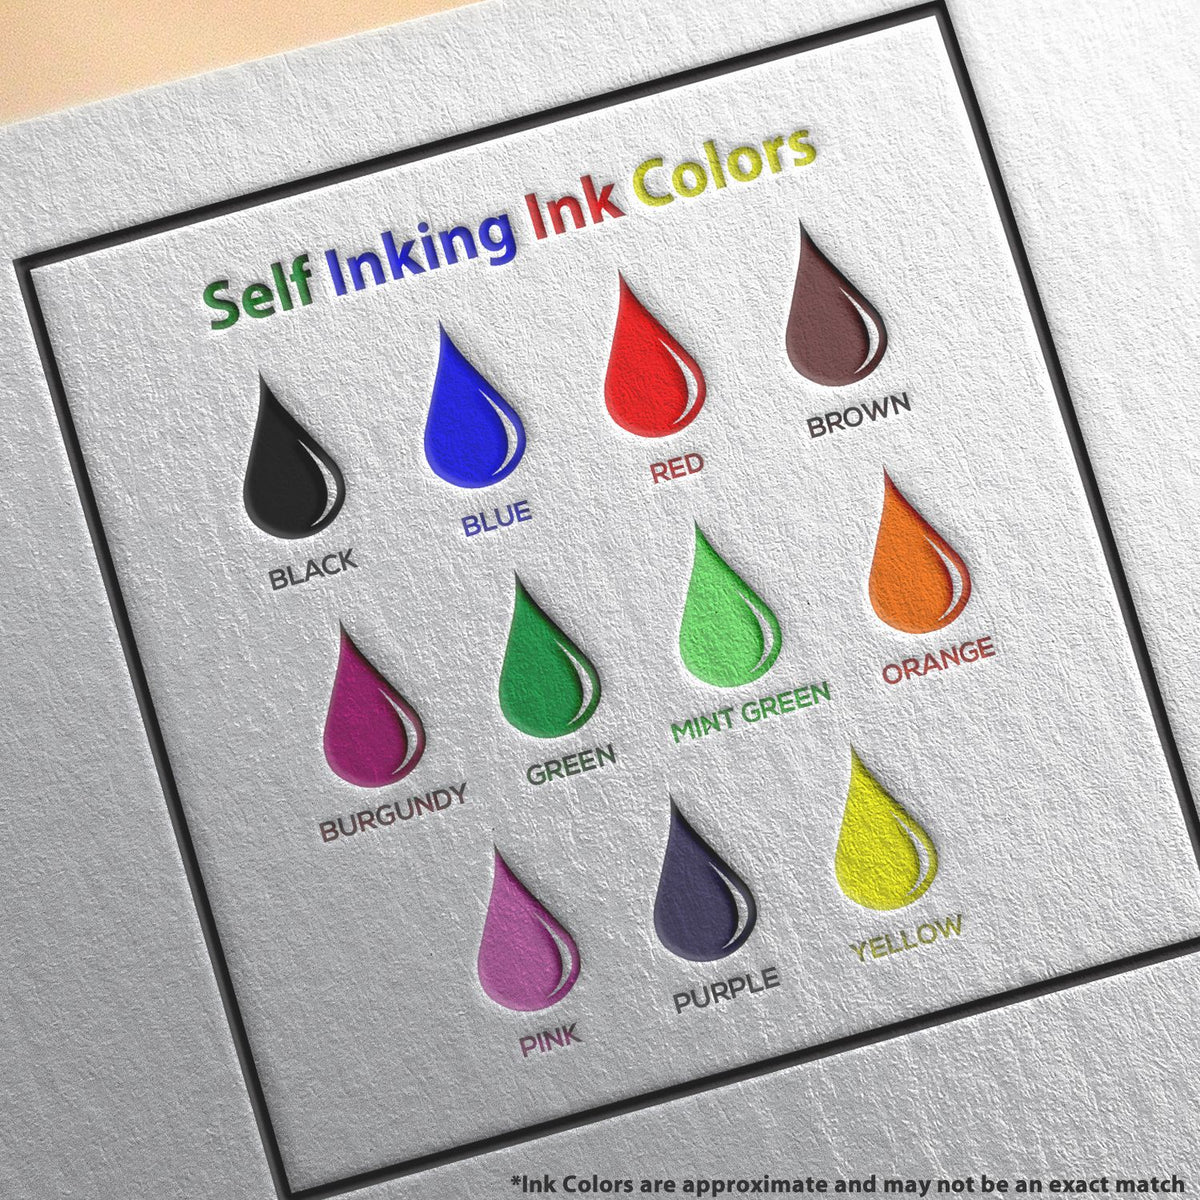 A picture showing the different ink colors or hues available for the Self-Inking Vermont Landscape Architect Stamp product.